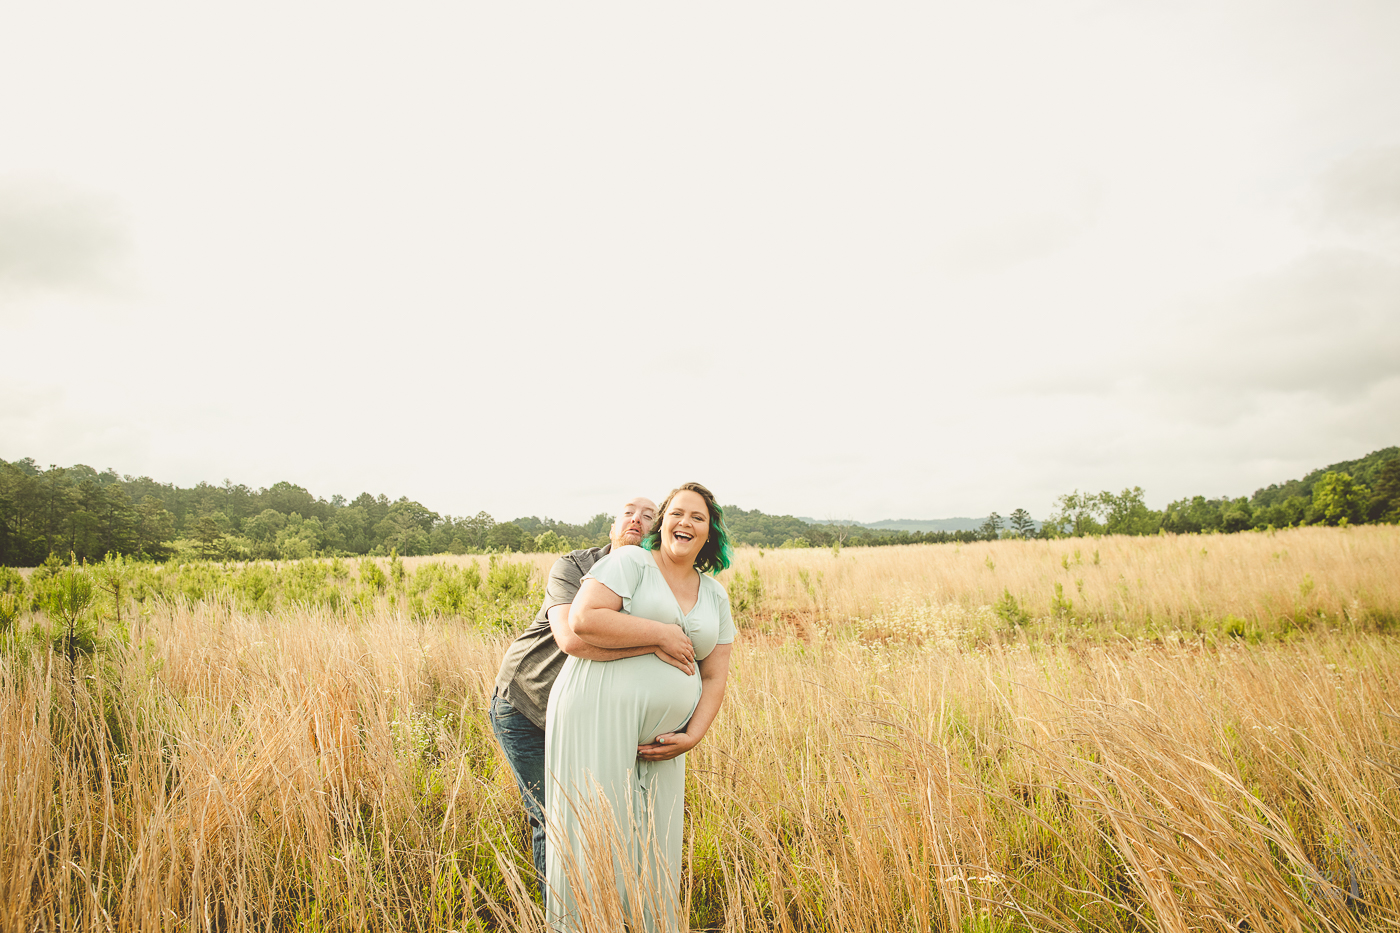 Pregnant couple goofing around making funny faces and laughing in a field for maternity photographs